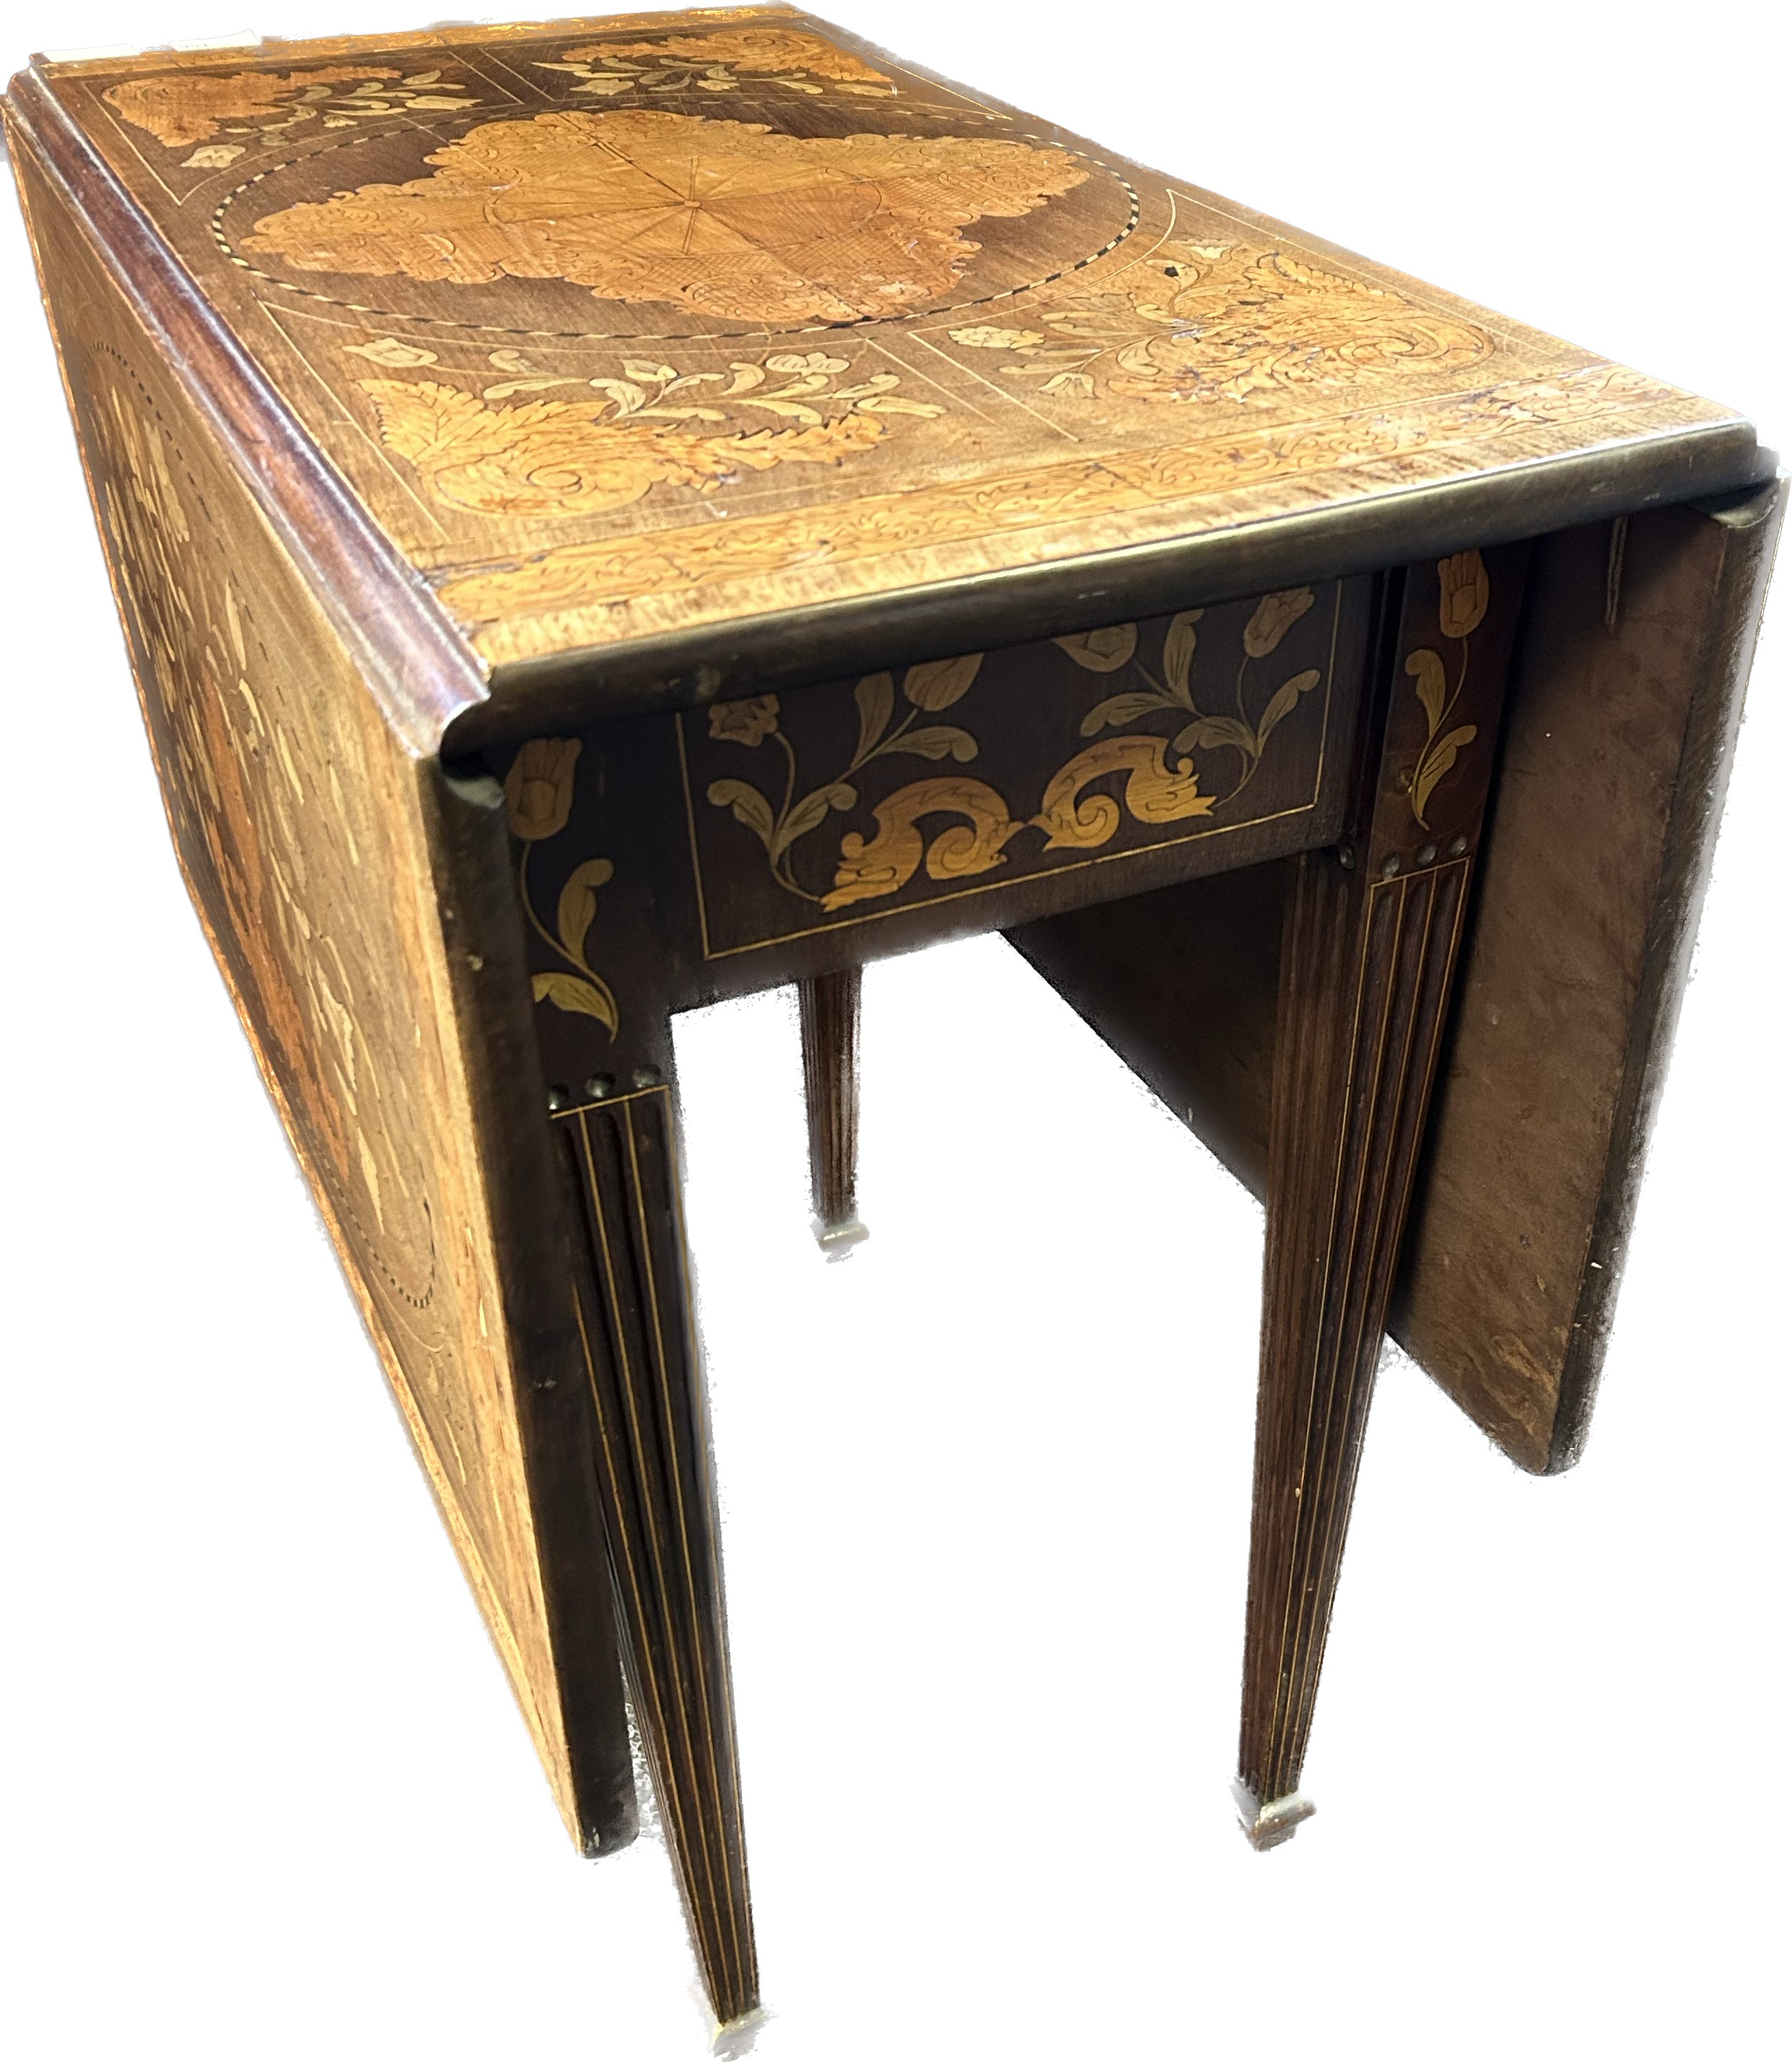 19th century Dutch table, the drop ends raising to a marquetry surface, the base with further - Image 3 of 8